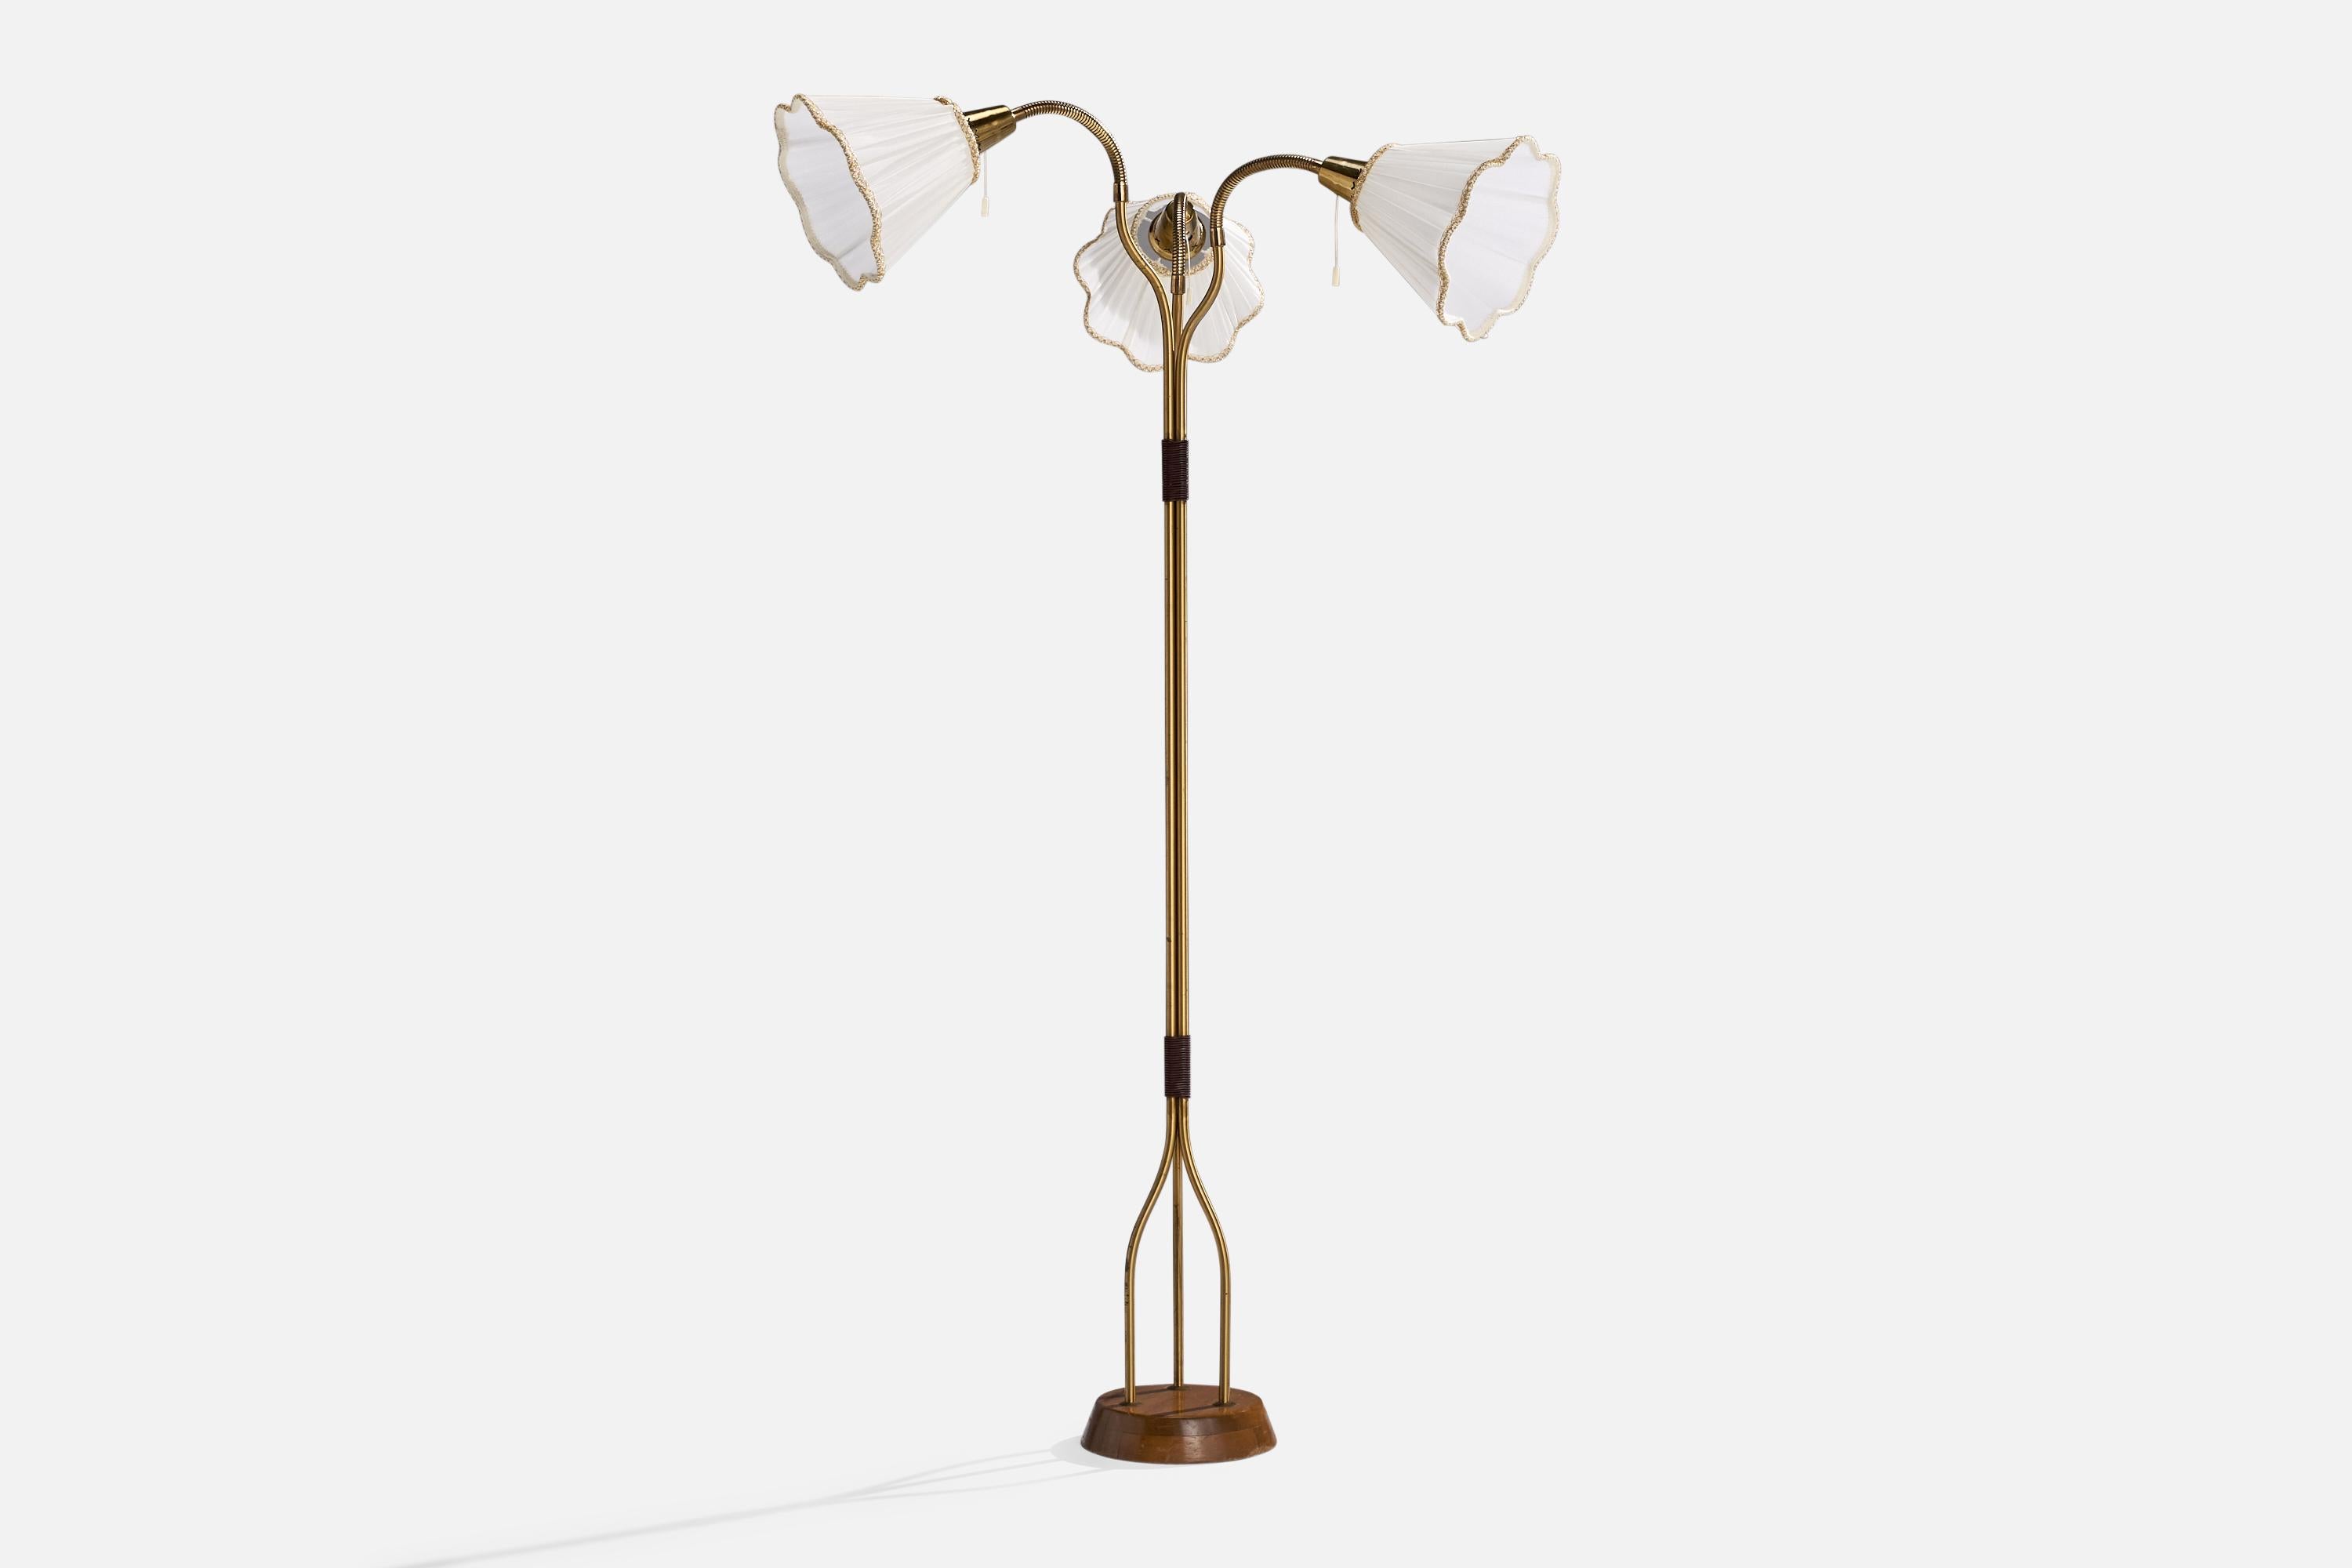 A brass, teak, white fabric and plastic cord floor lamp designed and produced in Sweden, 1950s.

Overall Dimensions (inches): 56” H x 33” W x 16” D
Stated dimensions include shade.
Bulb Specifications: E-26 Bulb
Number of Sockets: 3
All lighting